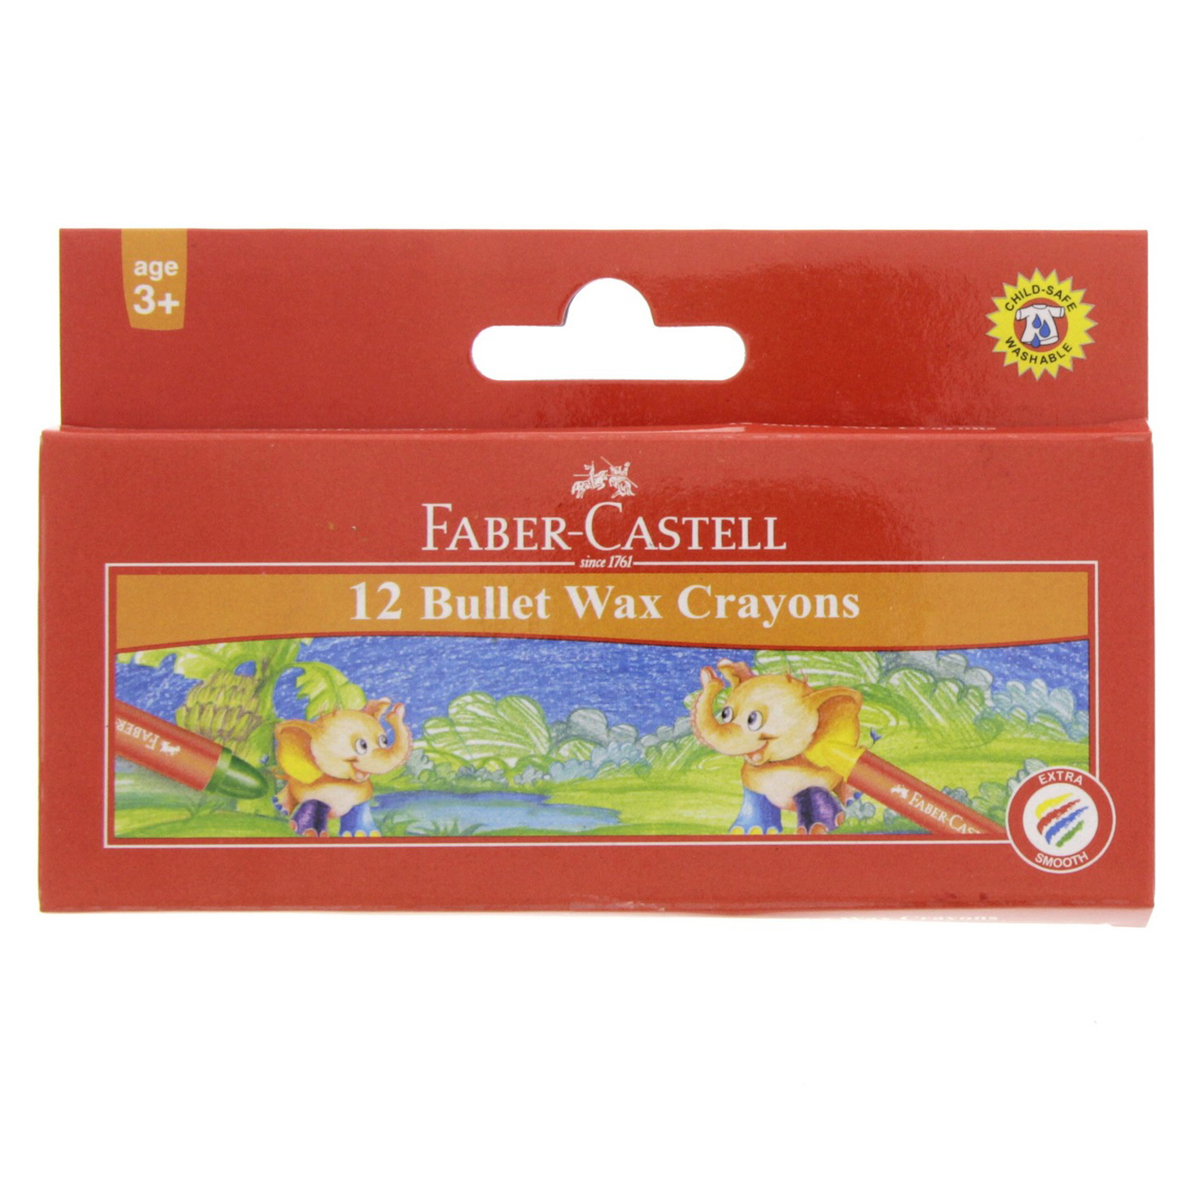 Faber-Castell Bullet Wax Crayons 12 Pieces